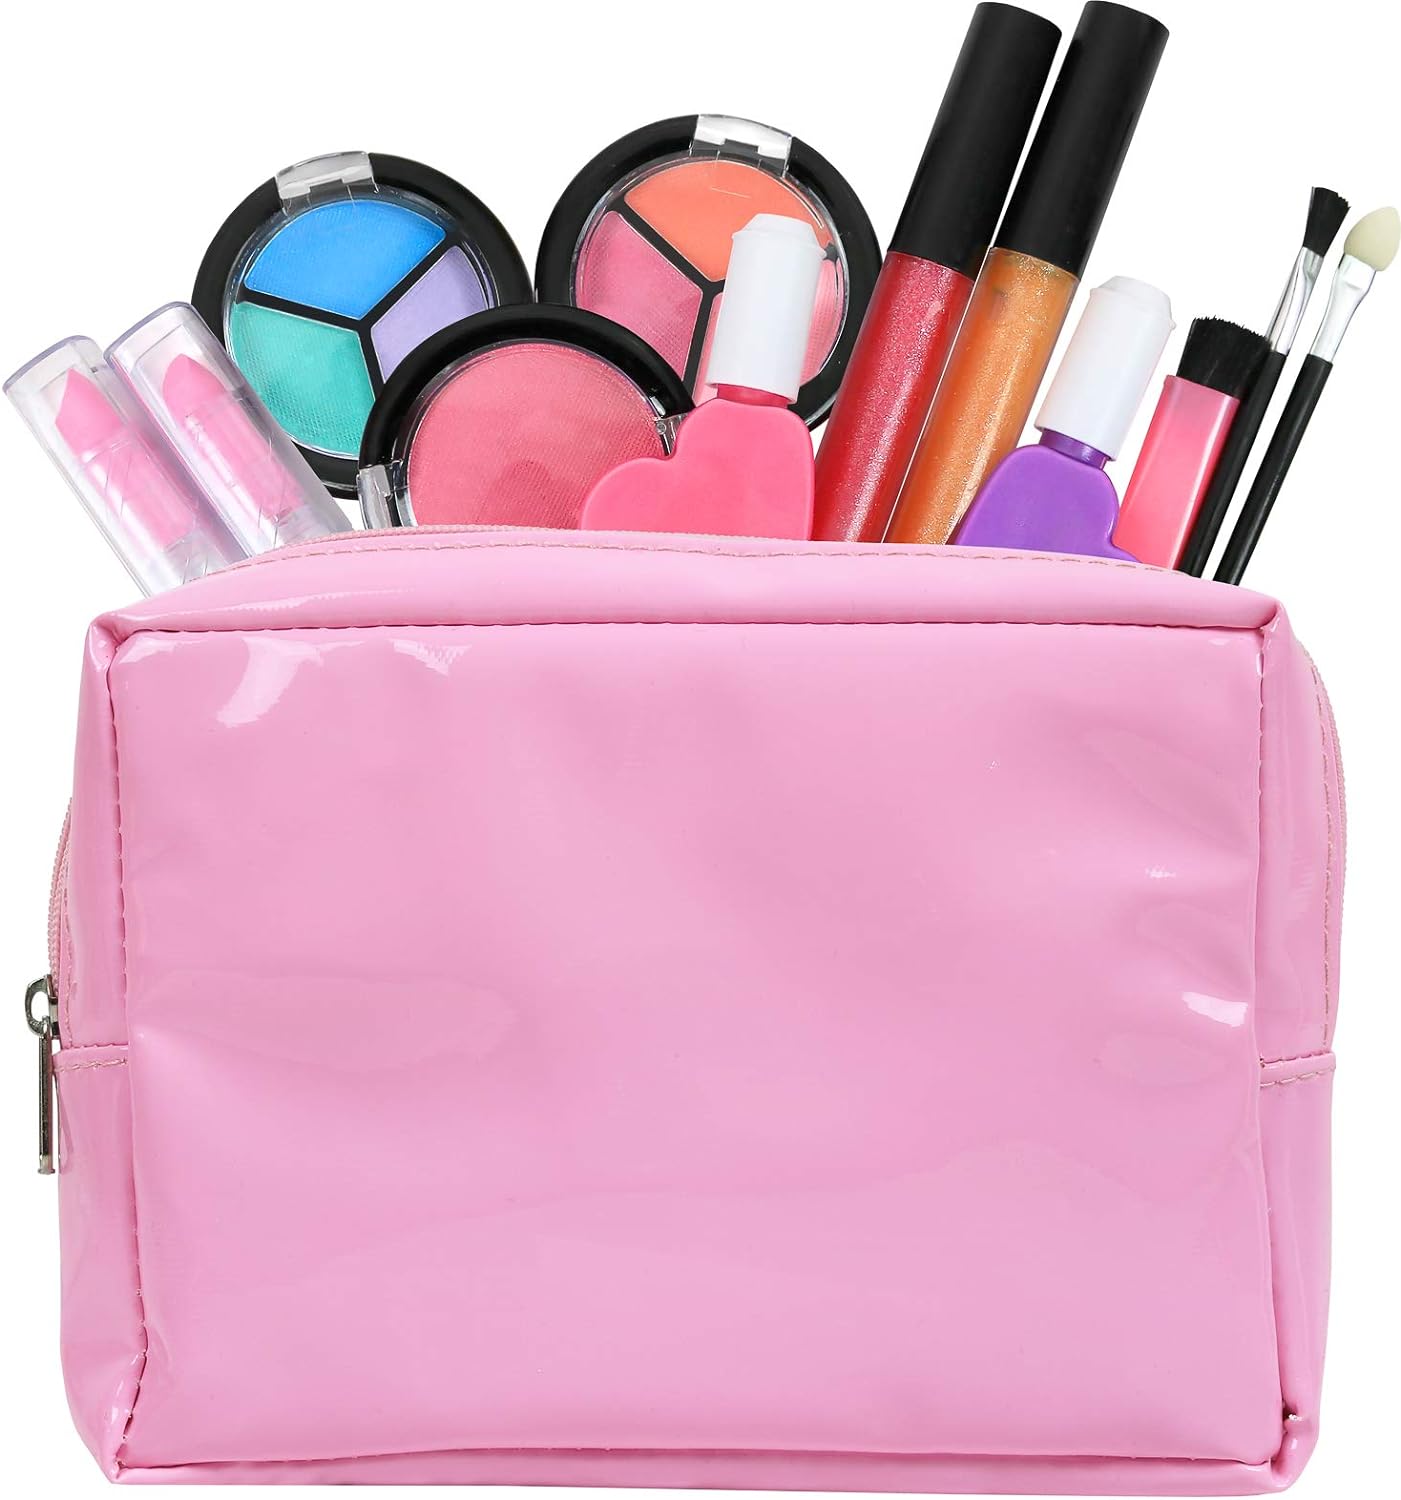 Click N' Play Kids Washable Makeup Set with Pink Tote Bag.